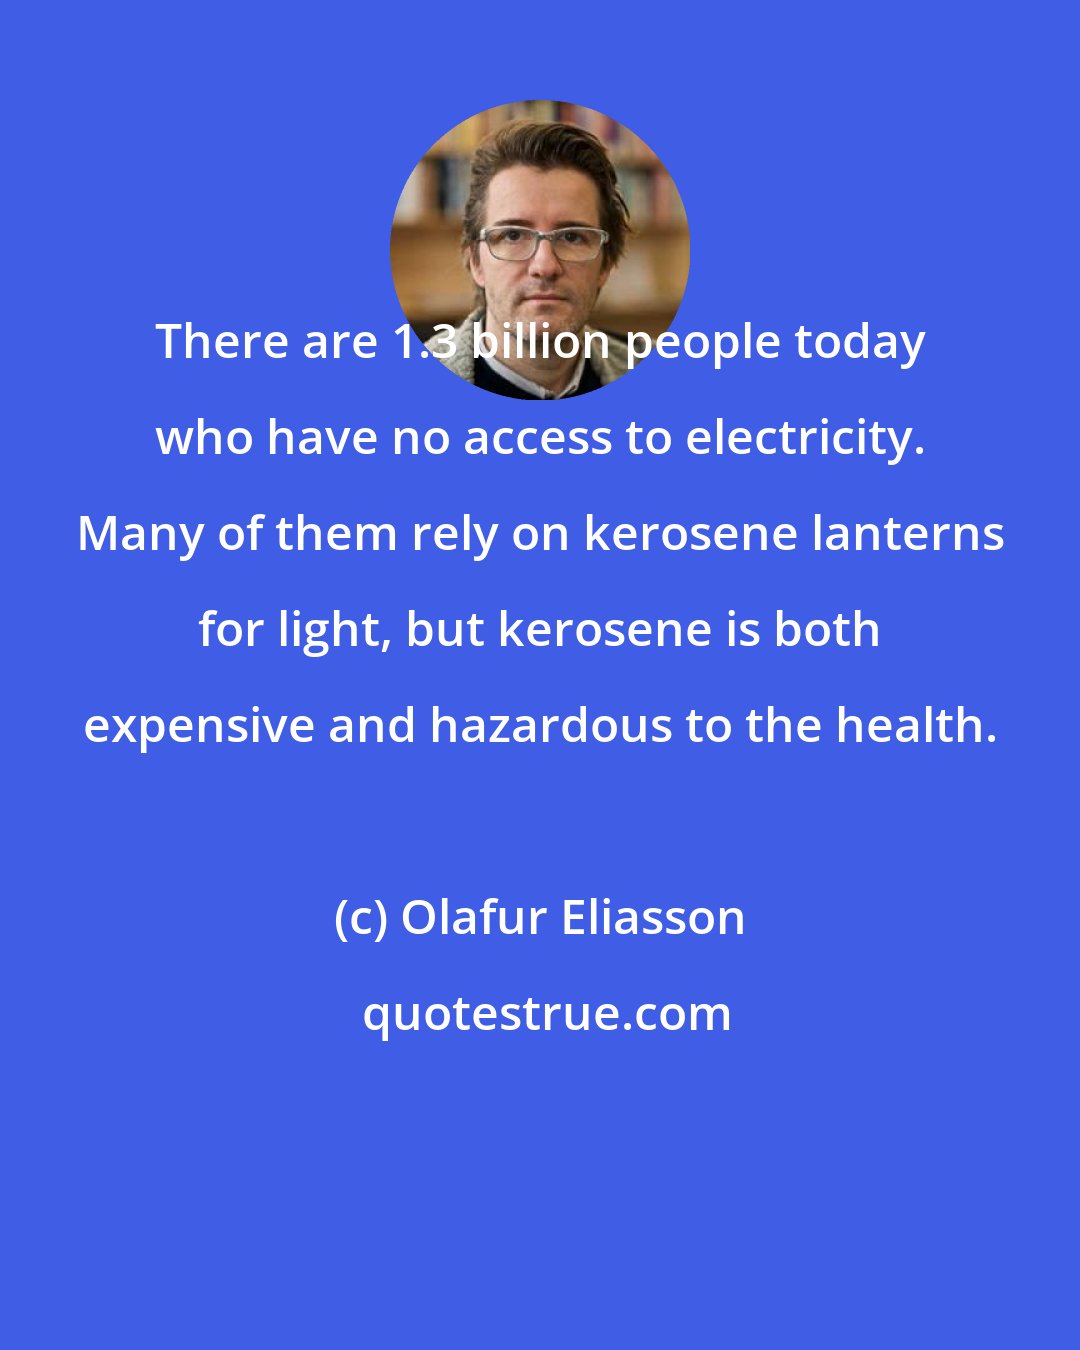 Olafur Eliasson: There are 1.3 billion people today who have no access to electricity. Many of them rely on kerosene lanterns for light, but kerosene is both expensive and hazardous to the health.